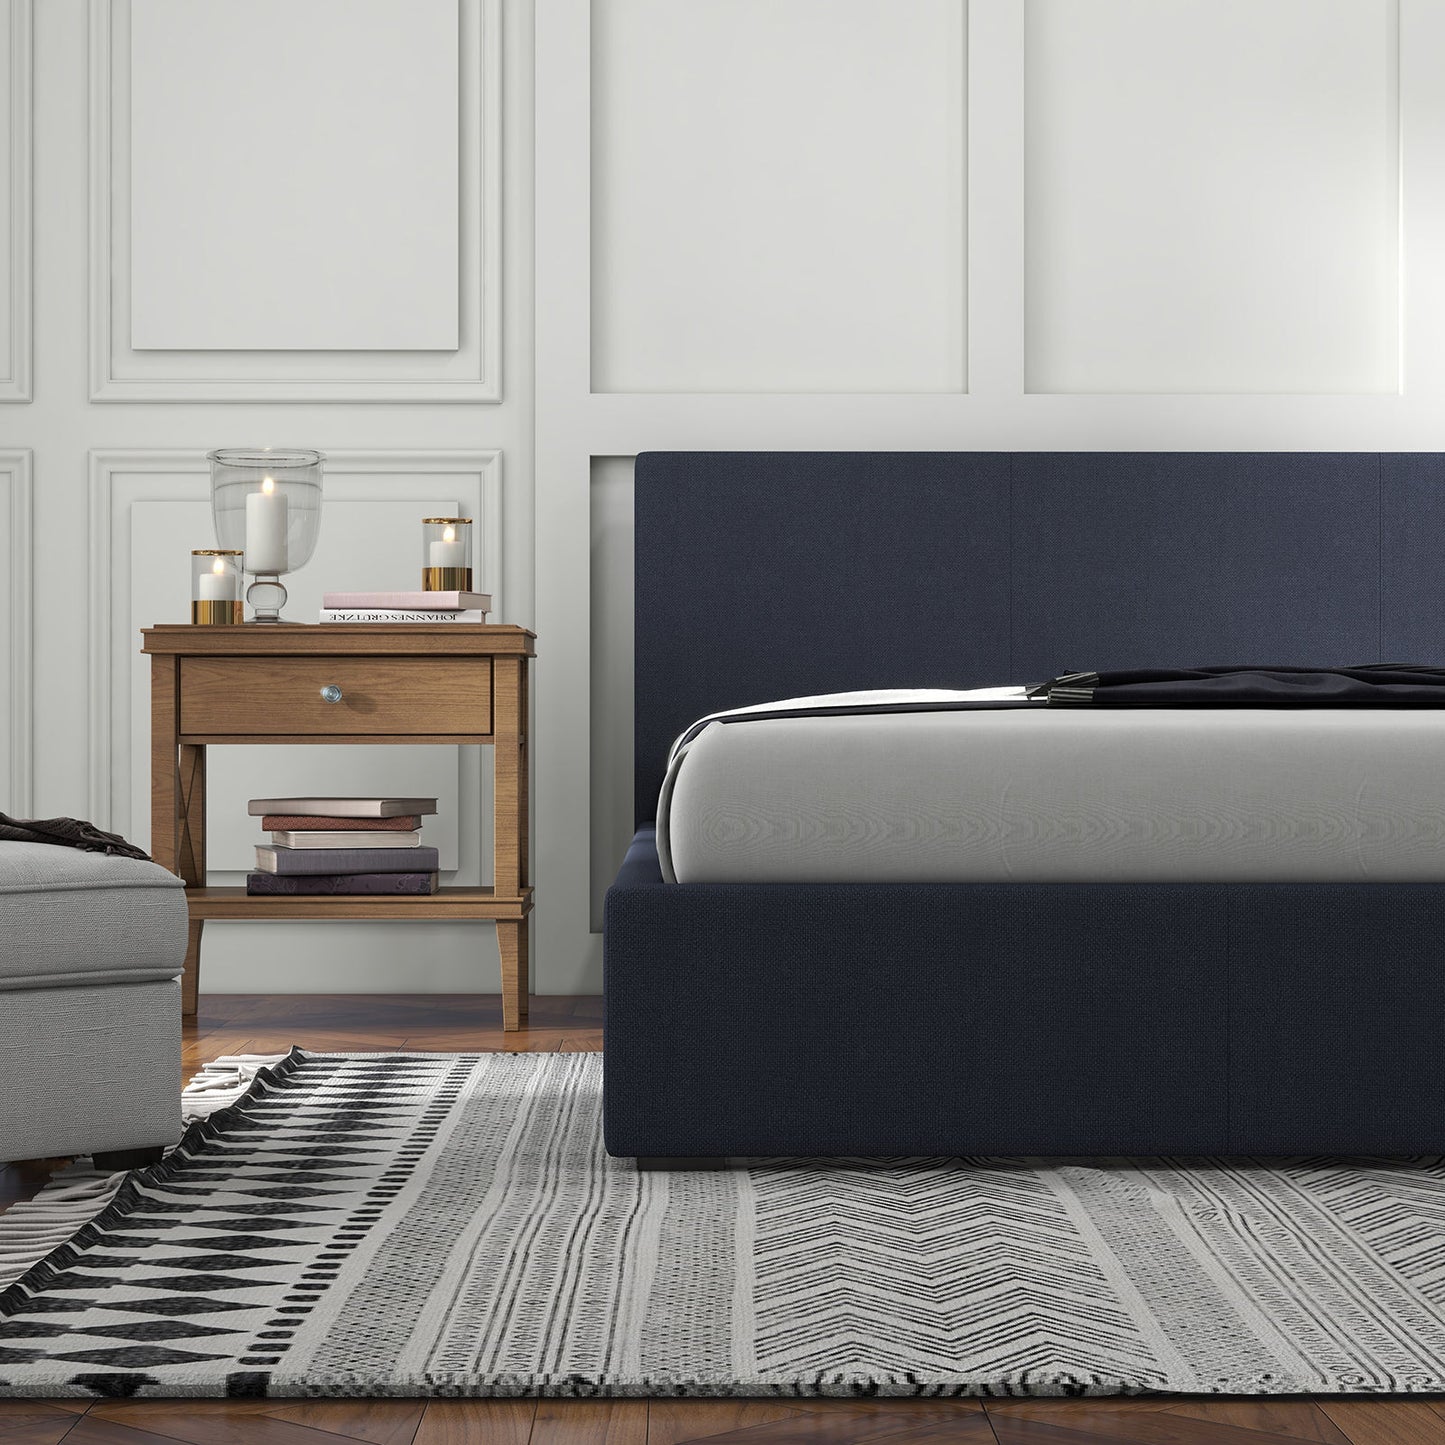 Sienna Luxury Bed with Headboard - Charcoal Double